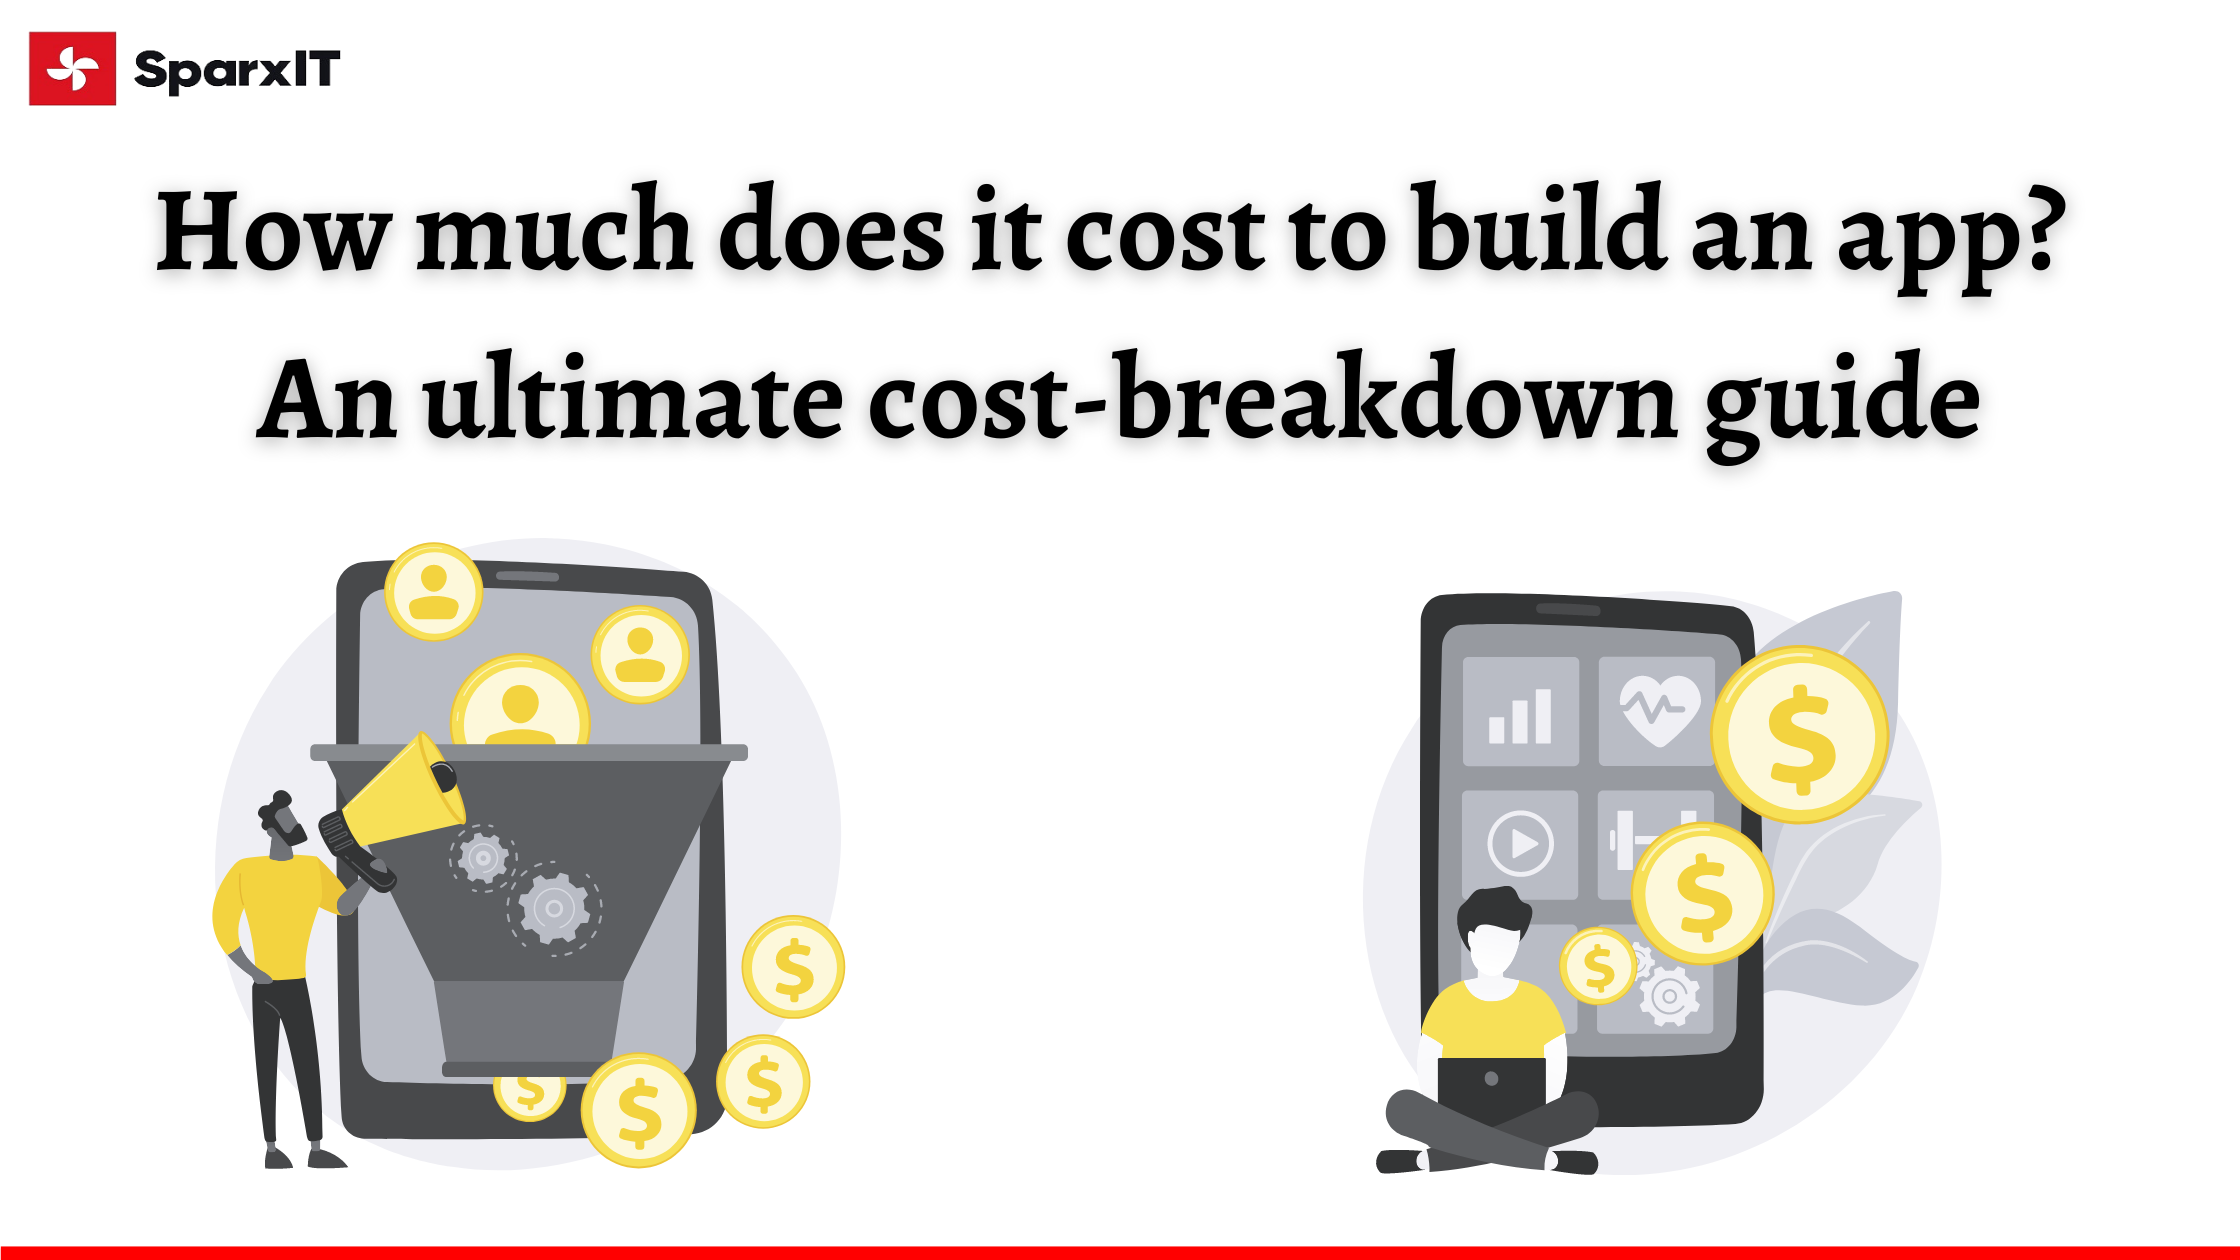 How Much Does It Cost To Build An App? An Ultimate Cost-Breakdown Guide